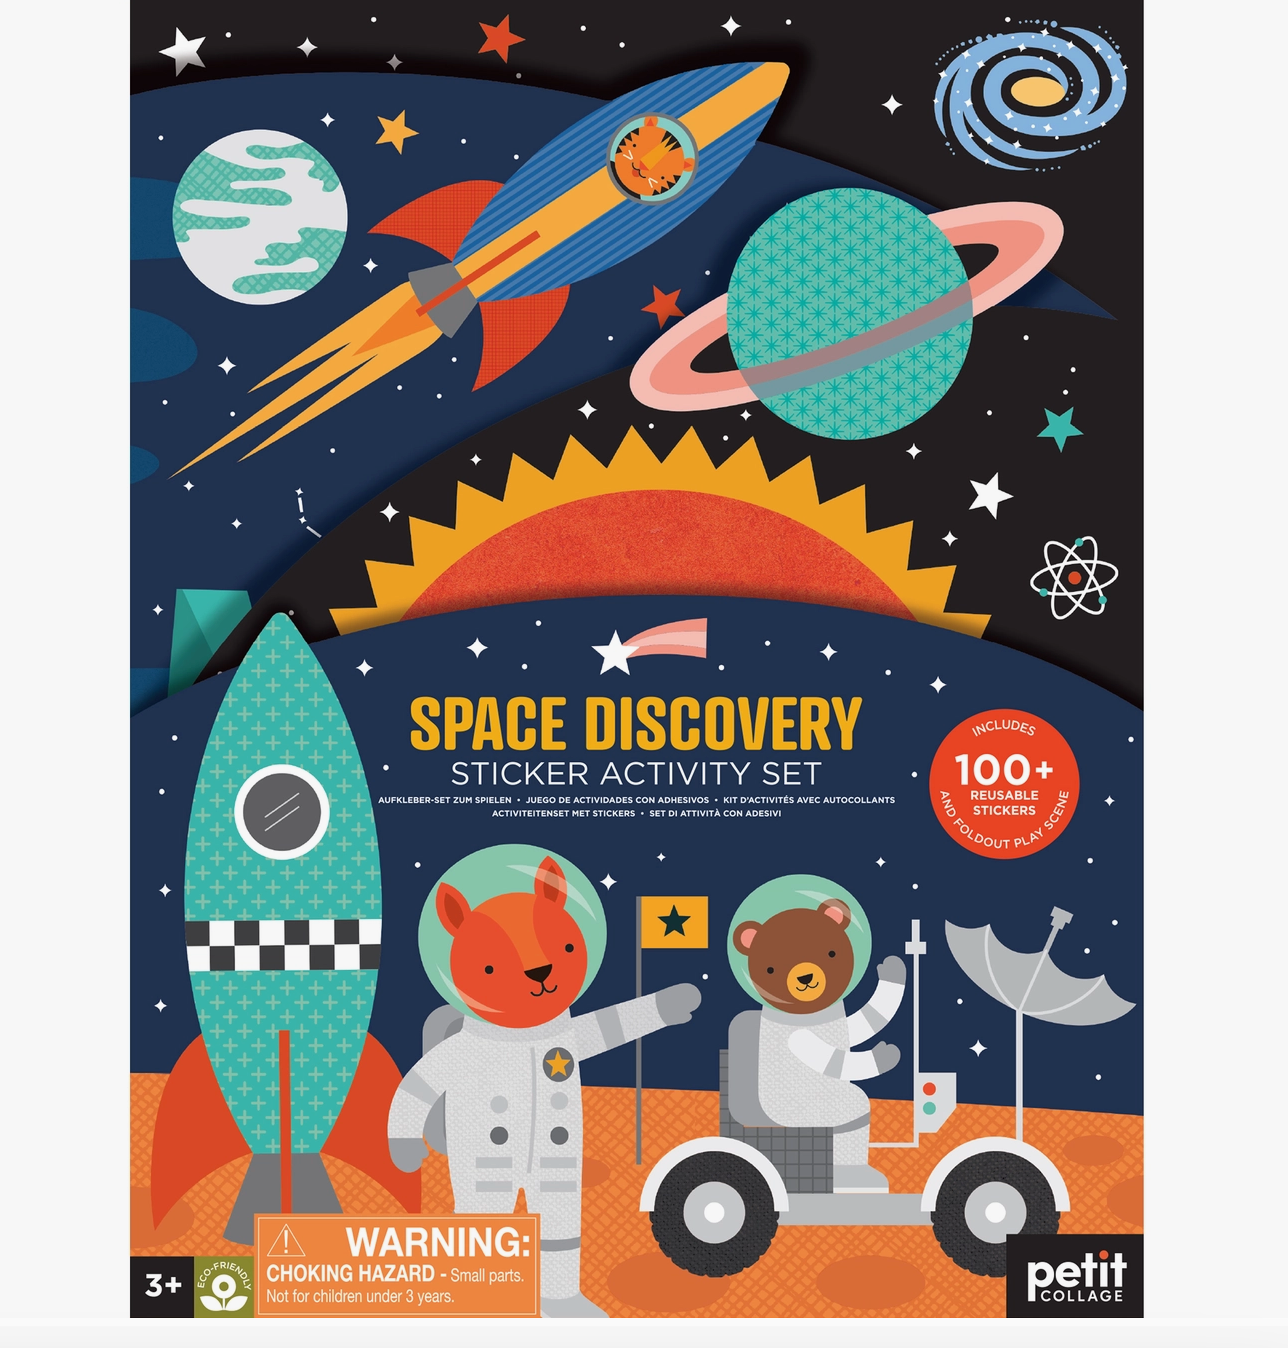 Space Discovery Sticker Activity Set